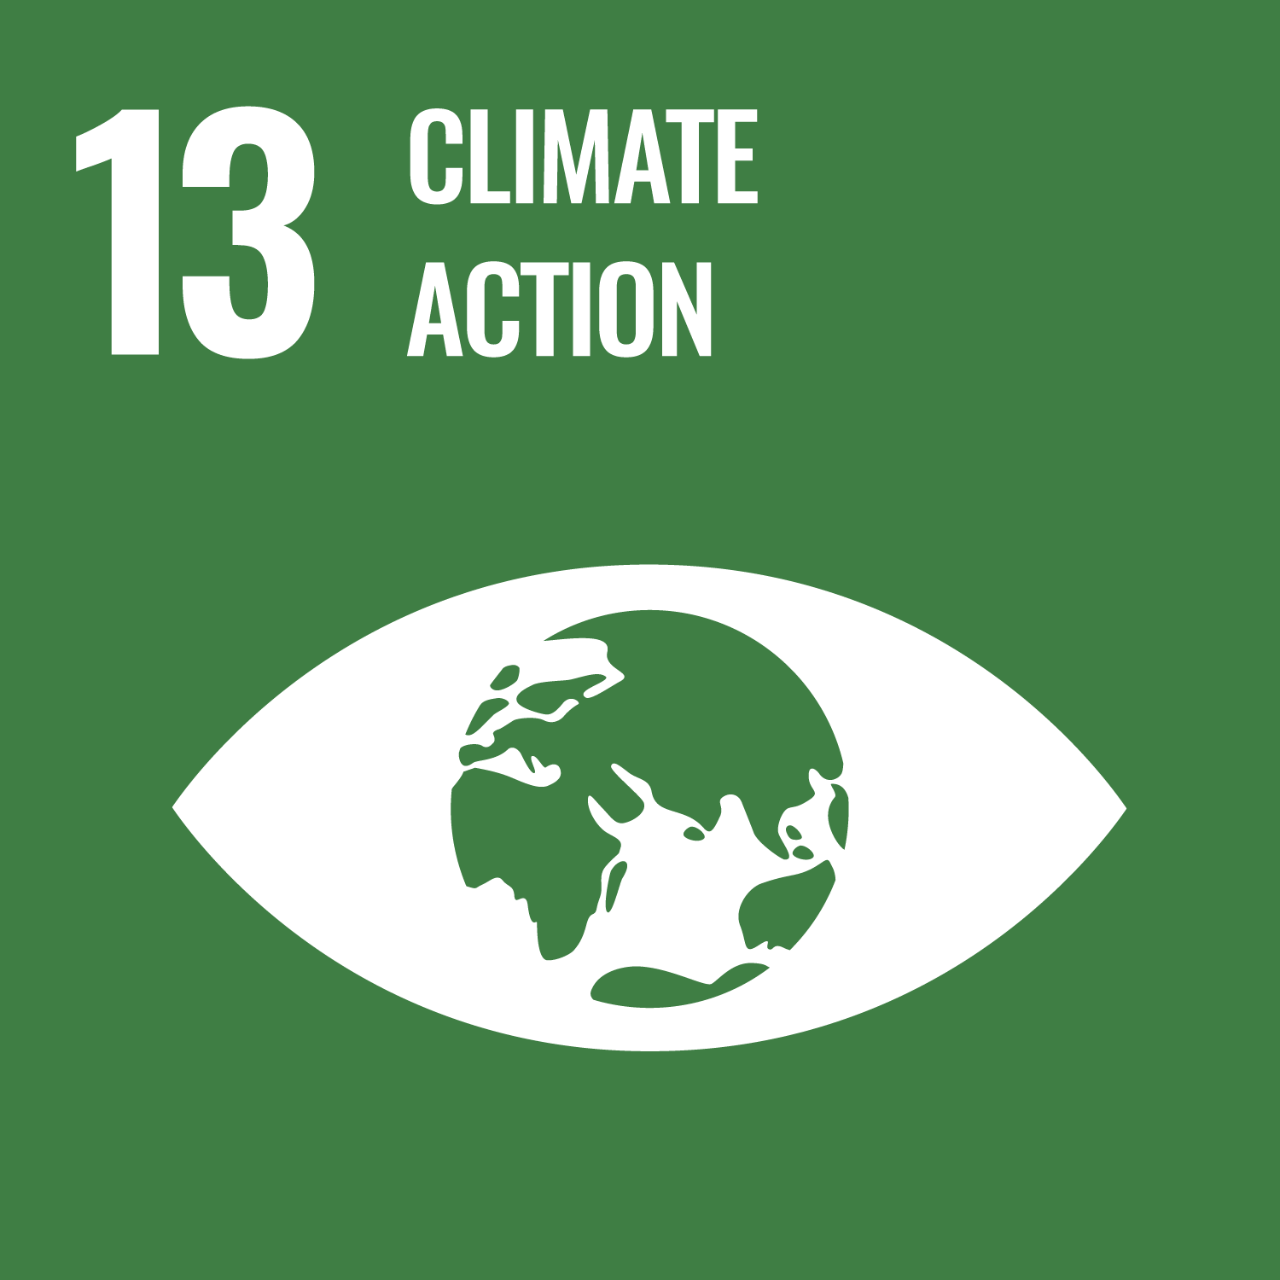 The Sustainable Development Goal 13 aims to take “urgent action to combat climate change and its impacts”